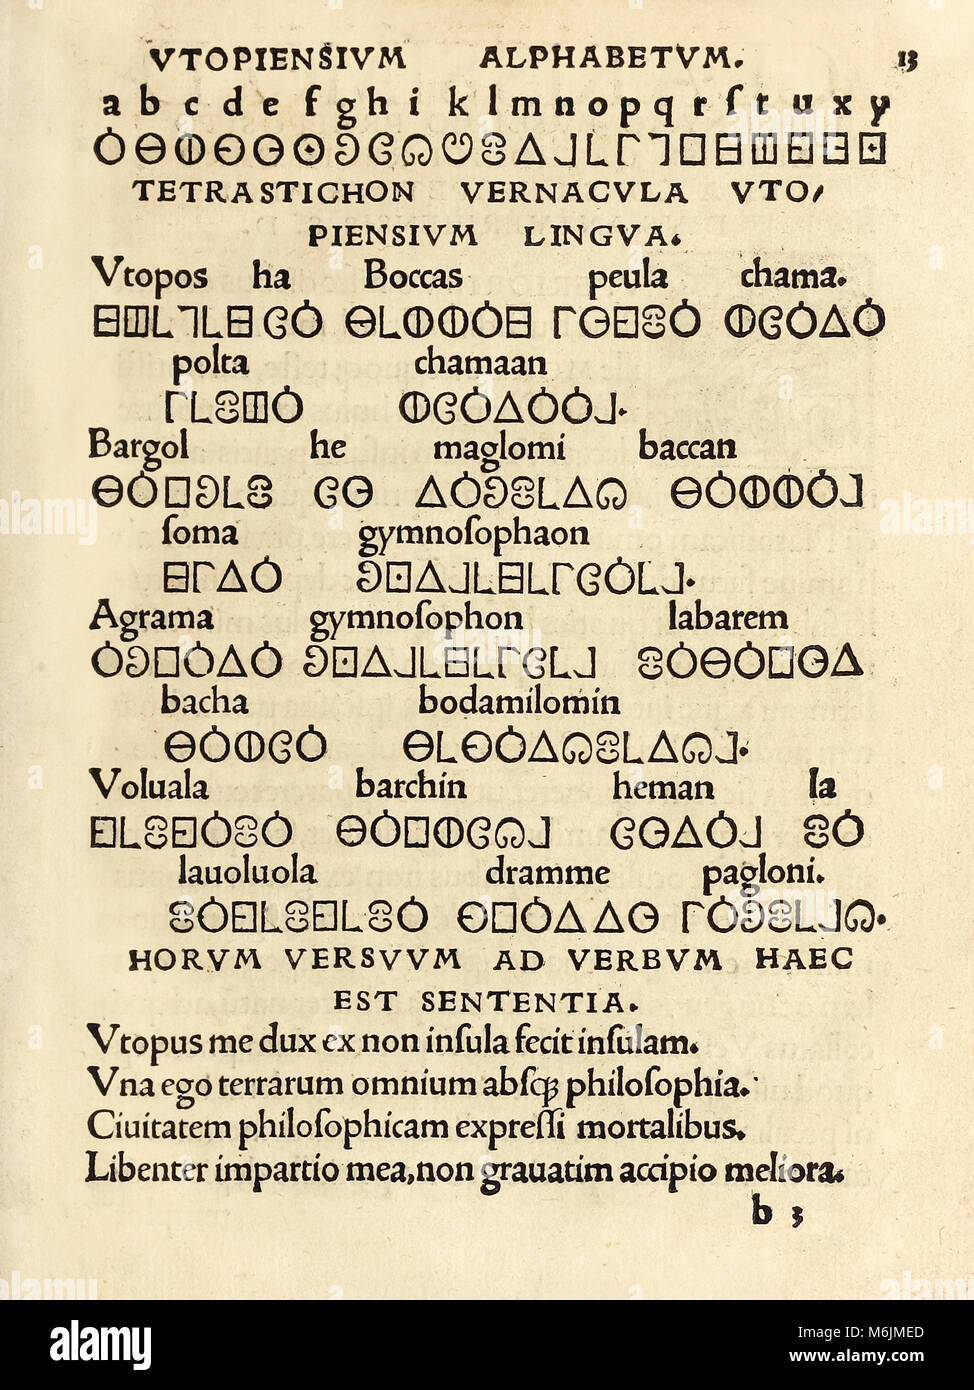 ‘Utopiensium Alphabetum’ (Utopian Alphabet) from the 1518 third edition of ‘Utopia’ by Sir Thomas More (1478–1535) first published in 1516.  Woodcut shows the fictitious language used on the island of Utopia. See more information below. Stock Photo